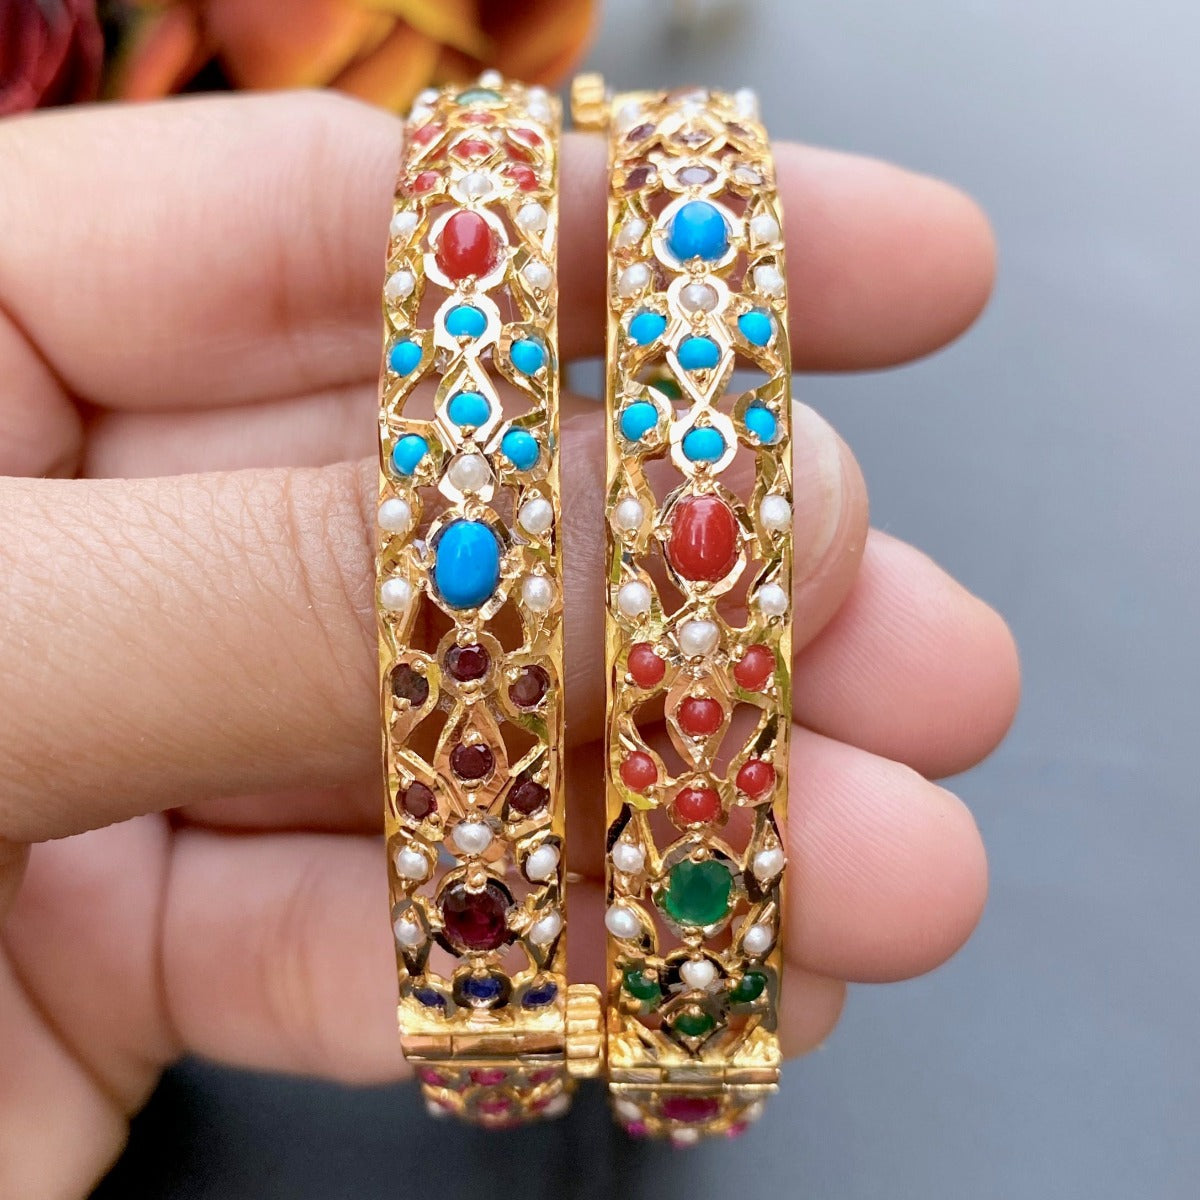 22ct solid gold Indian bangles